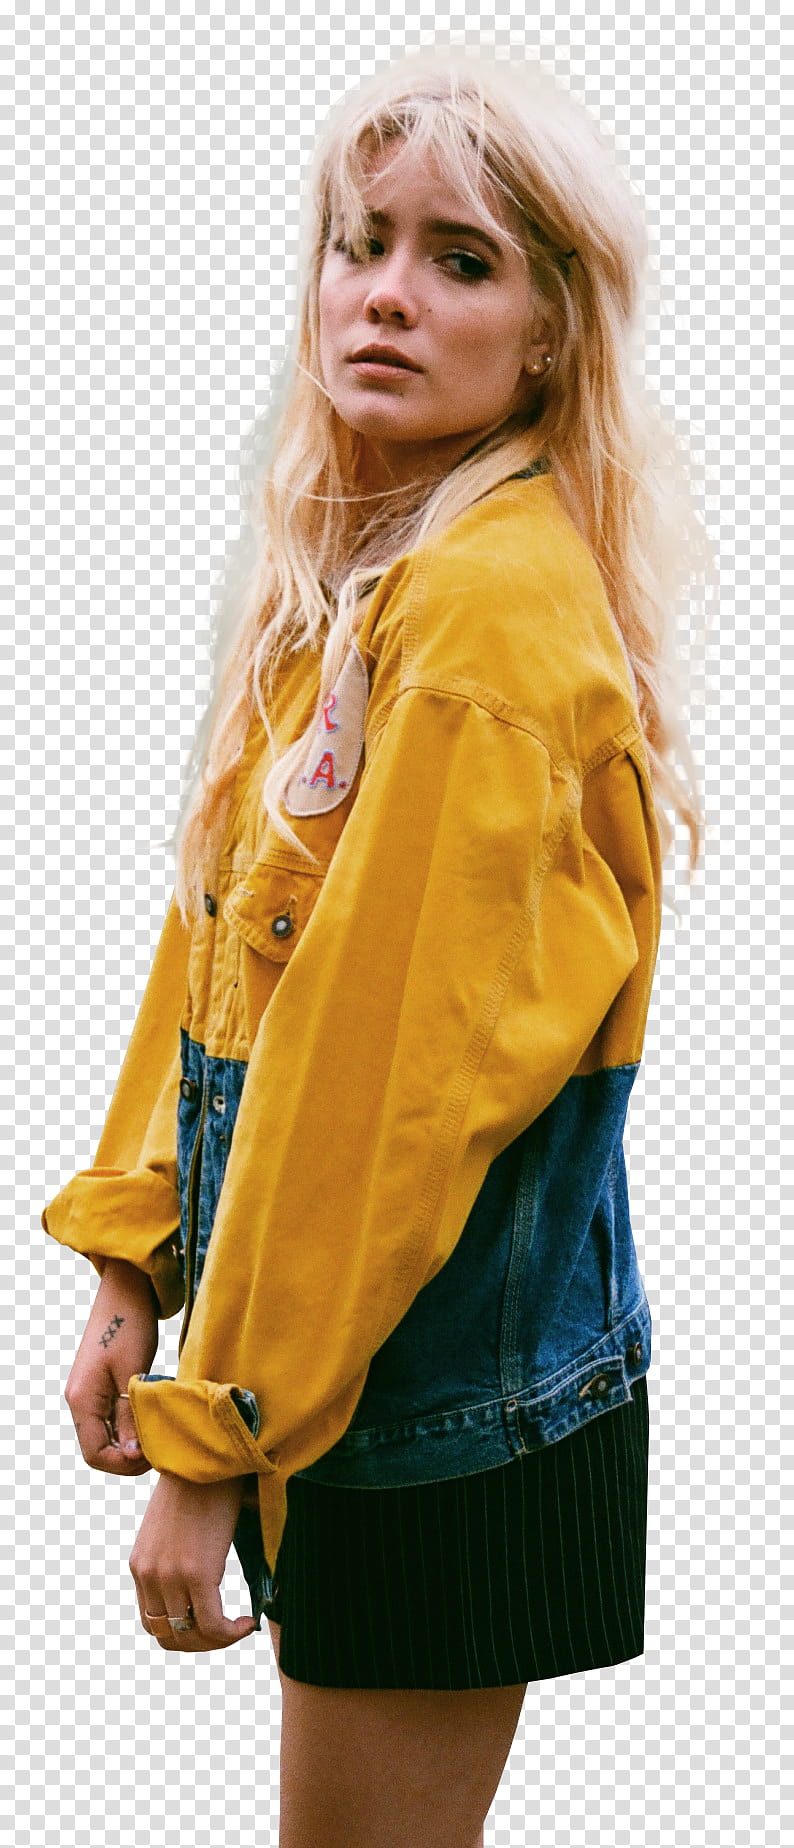 Halsey, woman wearing yellow jacket transparent background PNG clipart